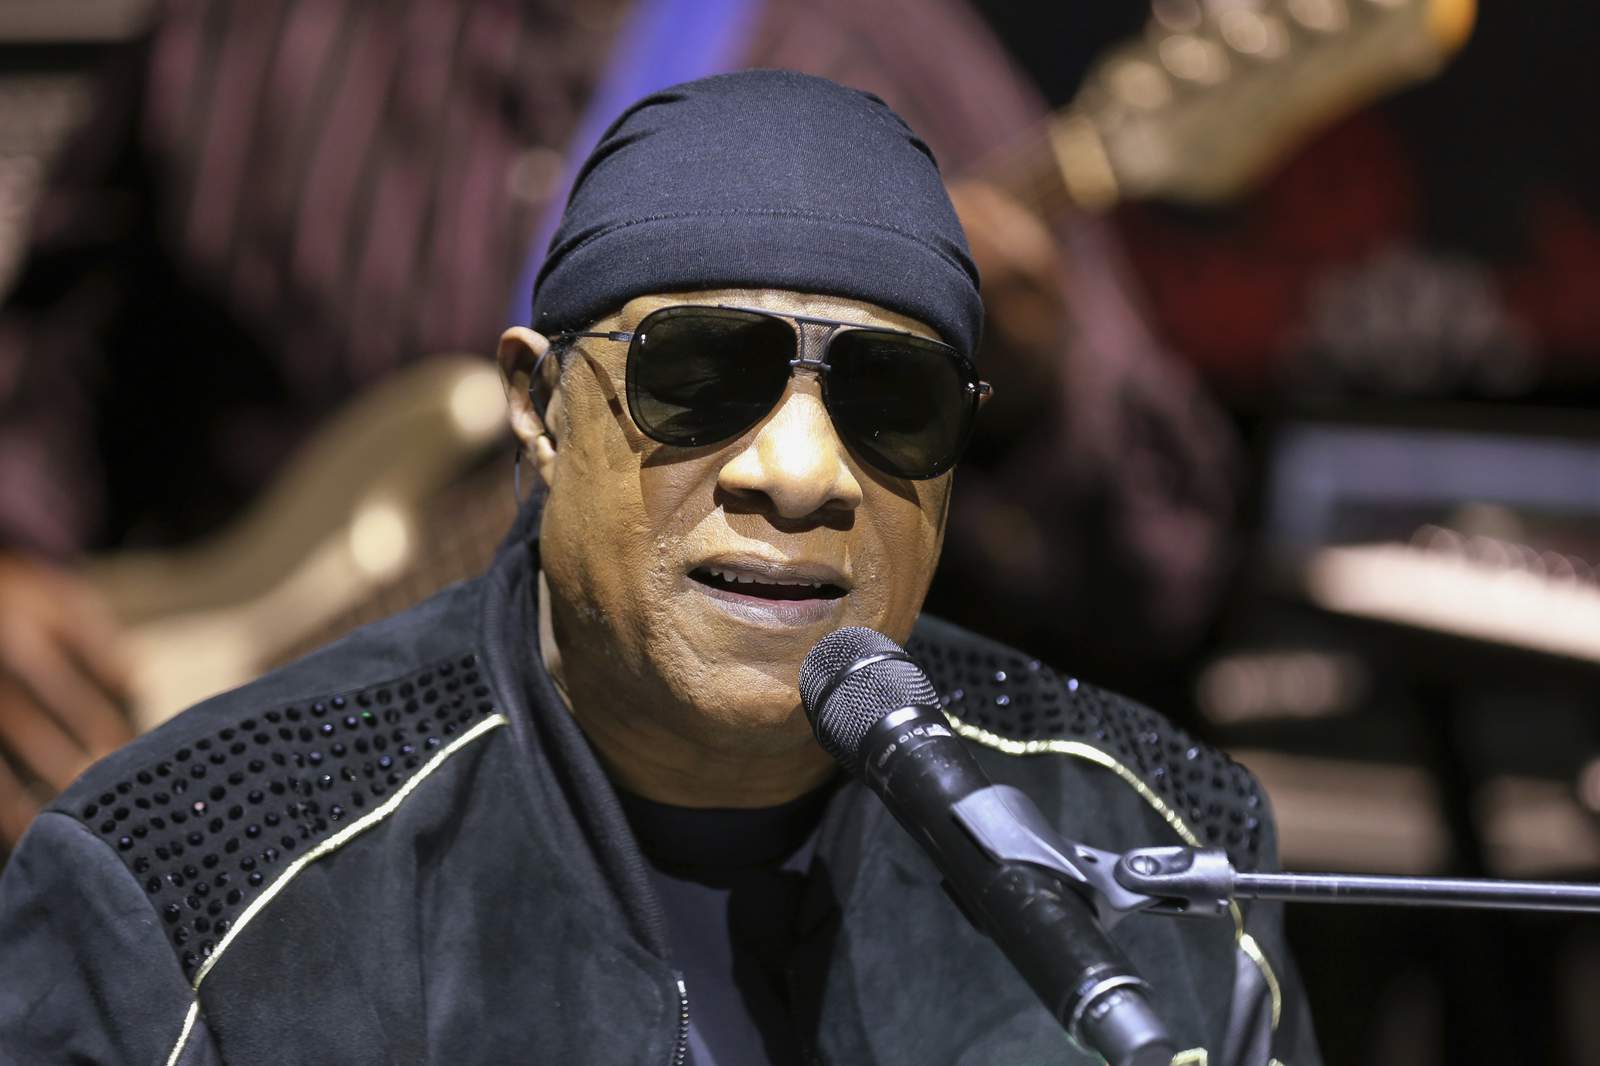 In open letter to Dr. King, Stevie Wonder calls for equality